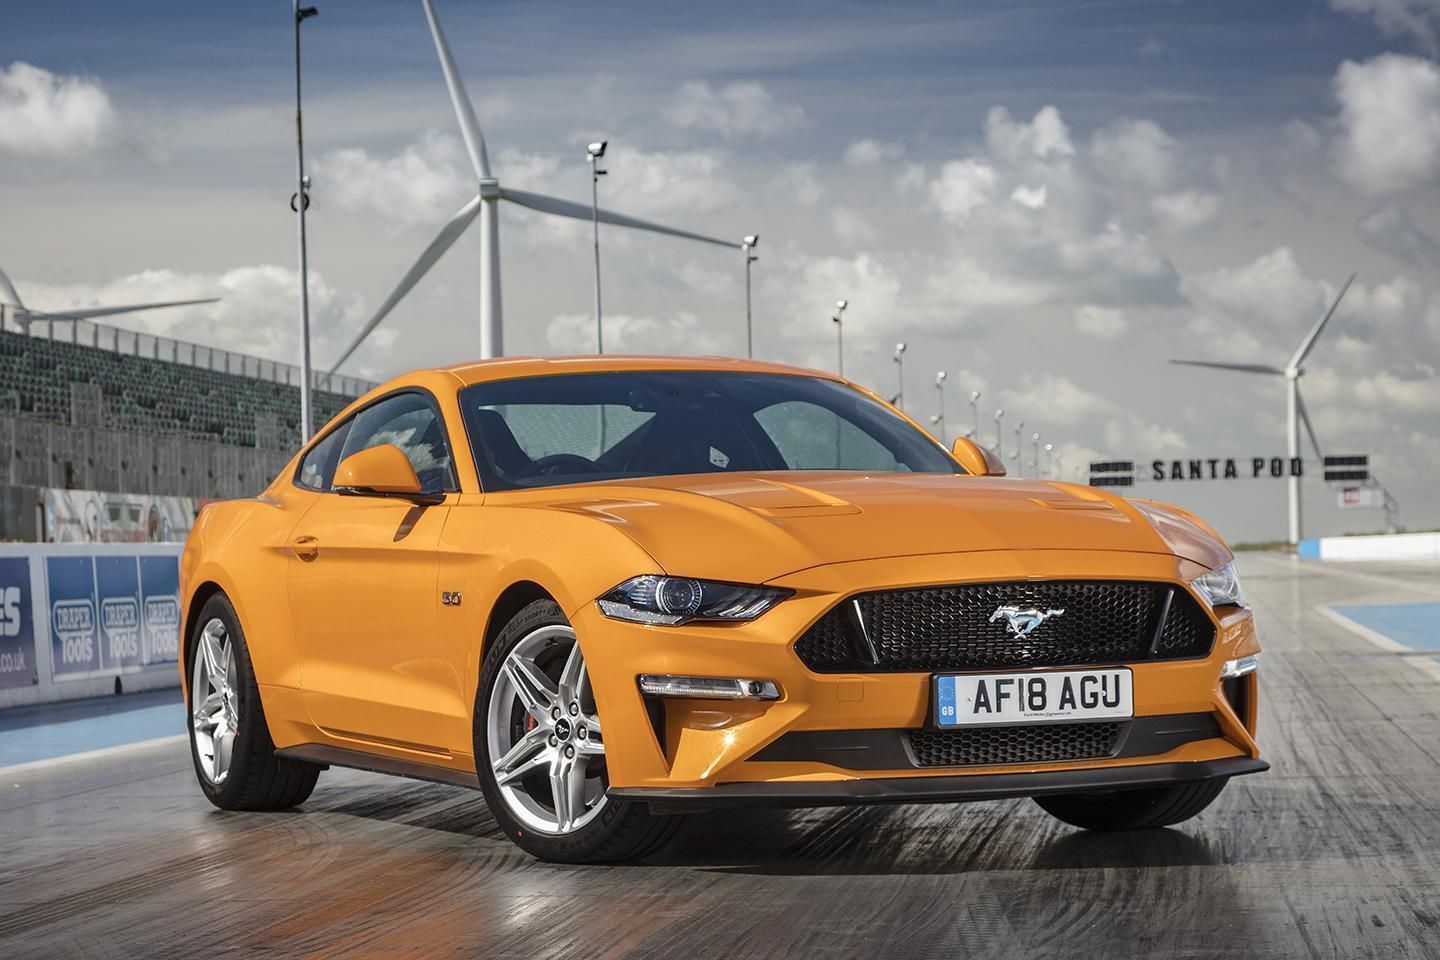 Clive Sutton Releases RHD Ford Mustang CS850R in UK